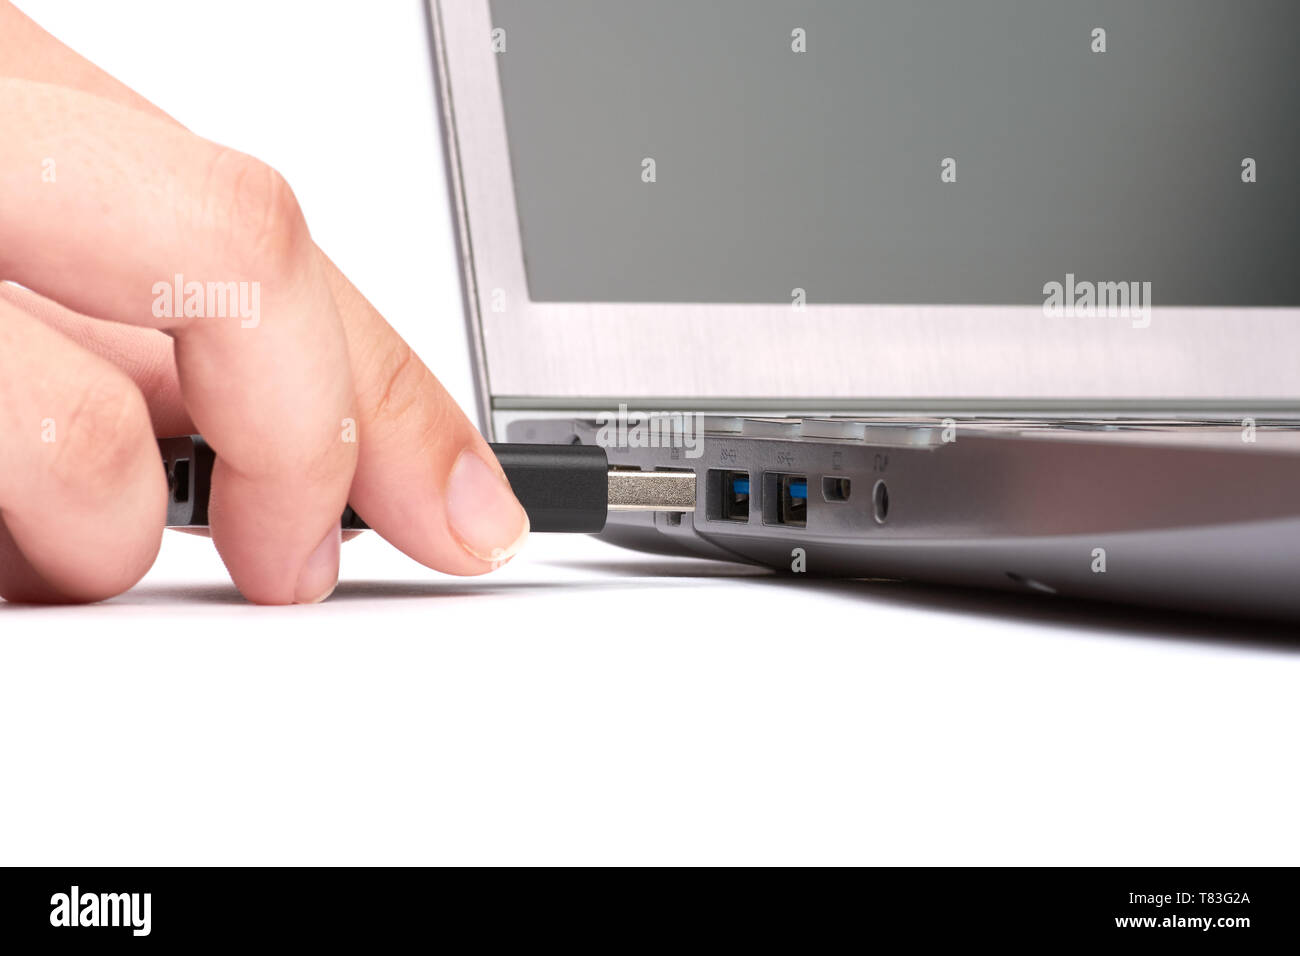 The hand of a young woman connects a USB flash drive to a port in a silver laptop with a black keyboard. Isolated on white background. Stock Photo